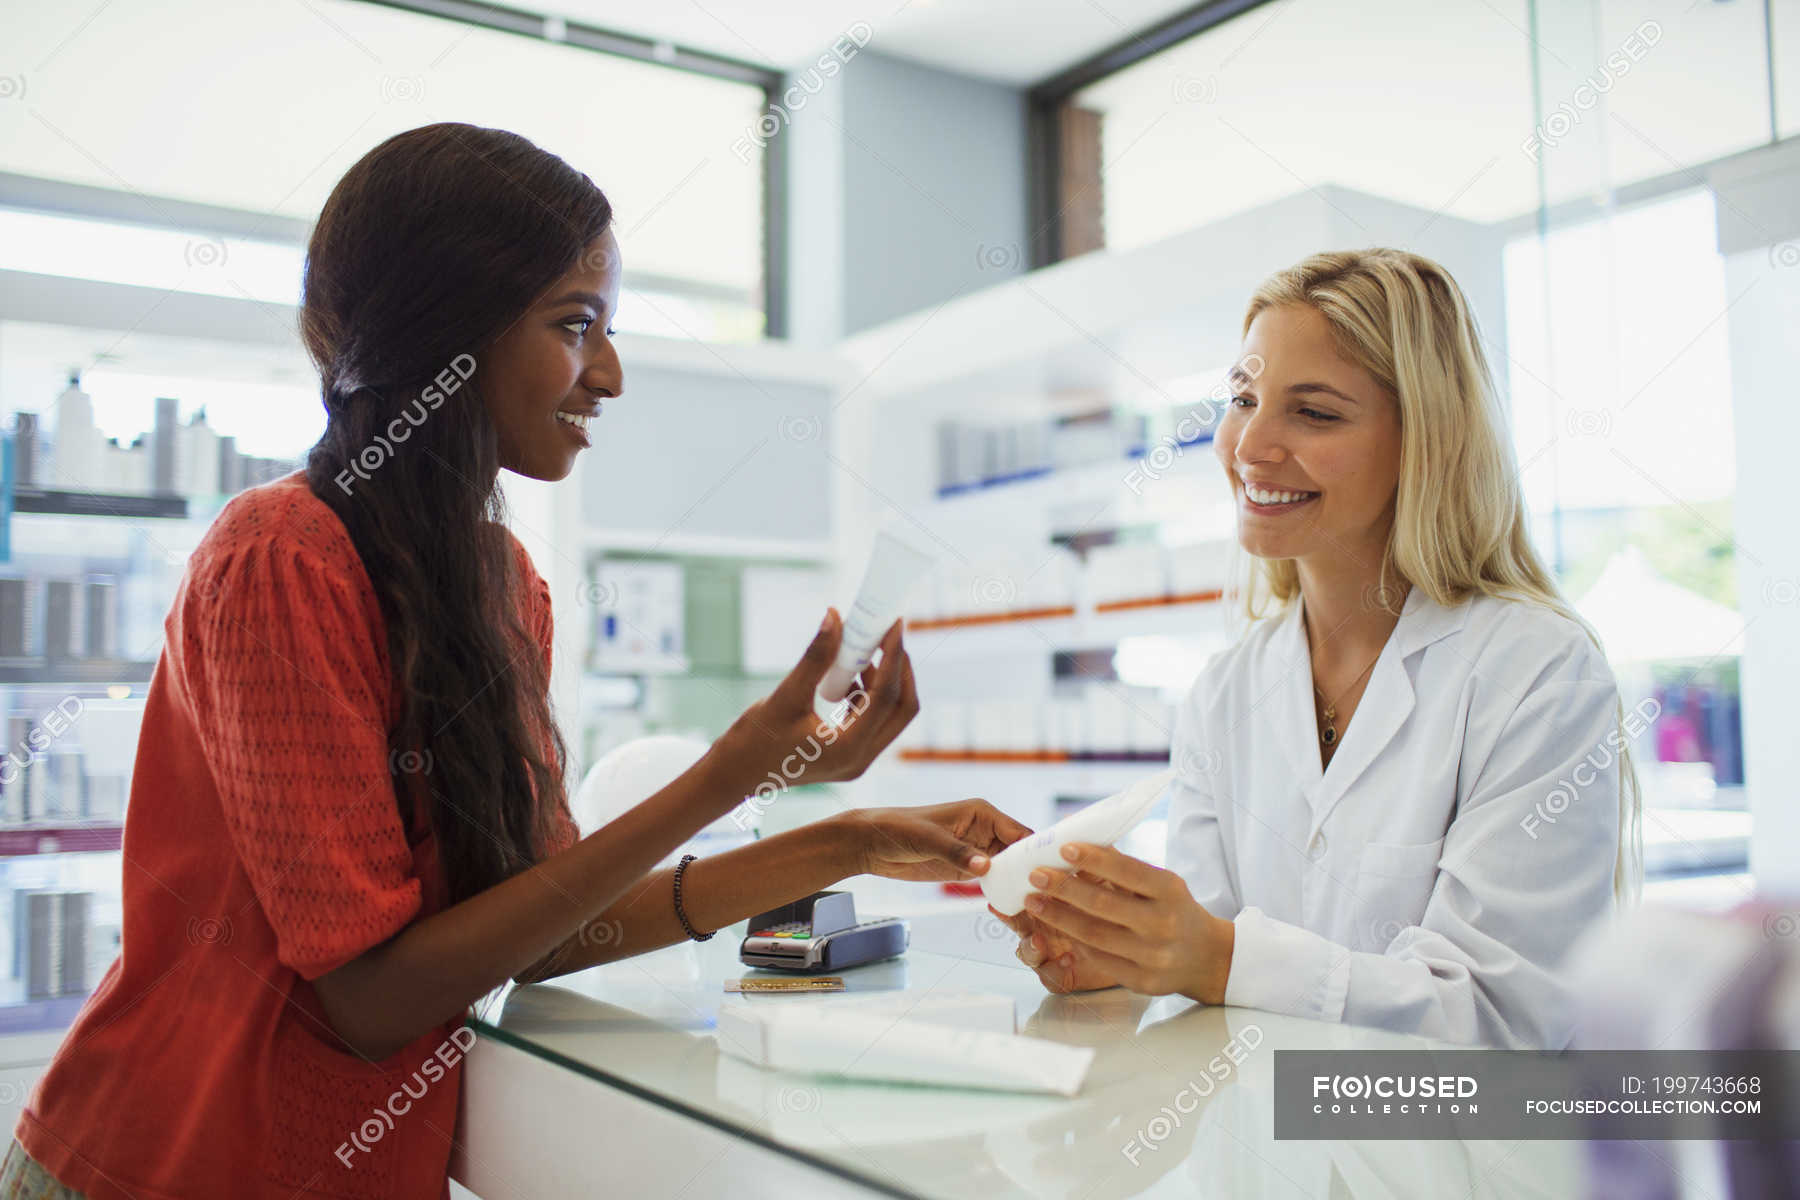 Woman Discussing Skincare Product With Pharmacist In Drugstore